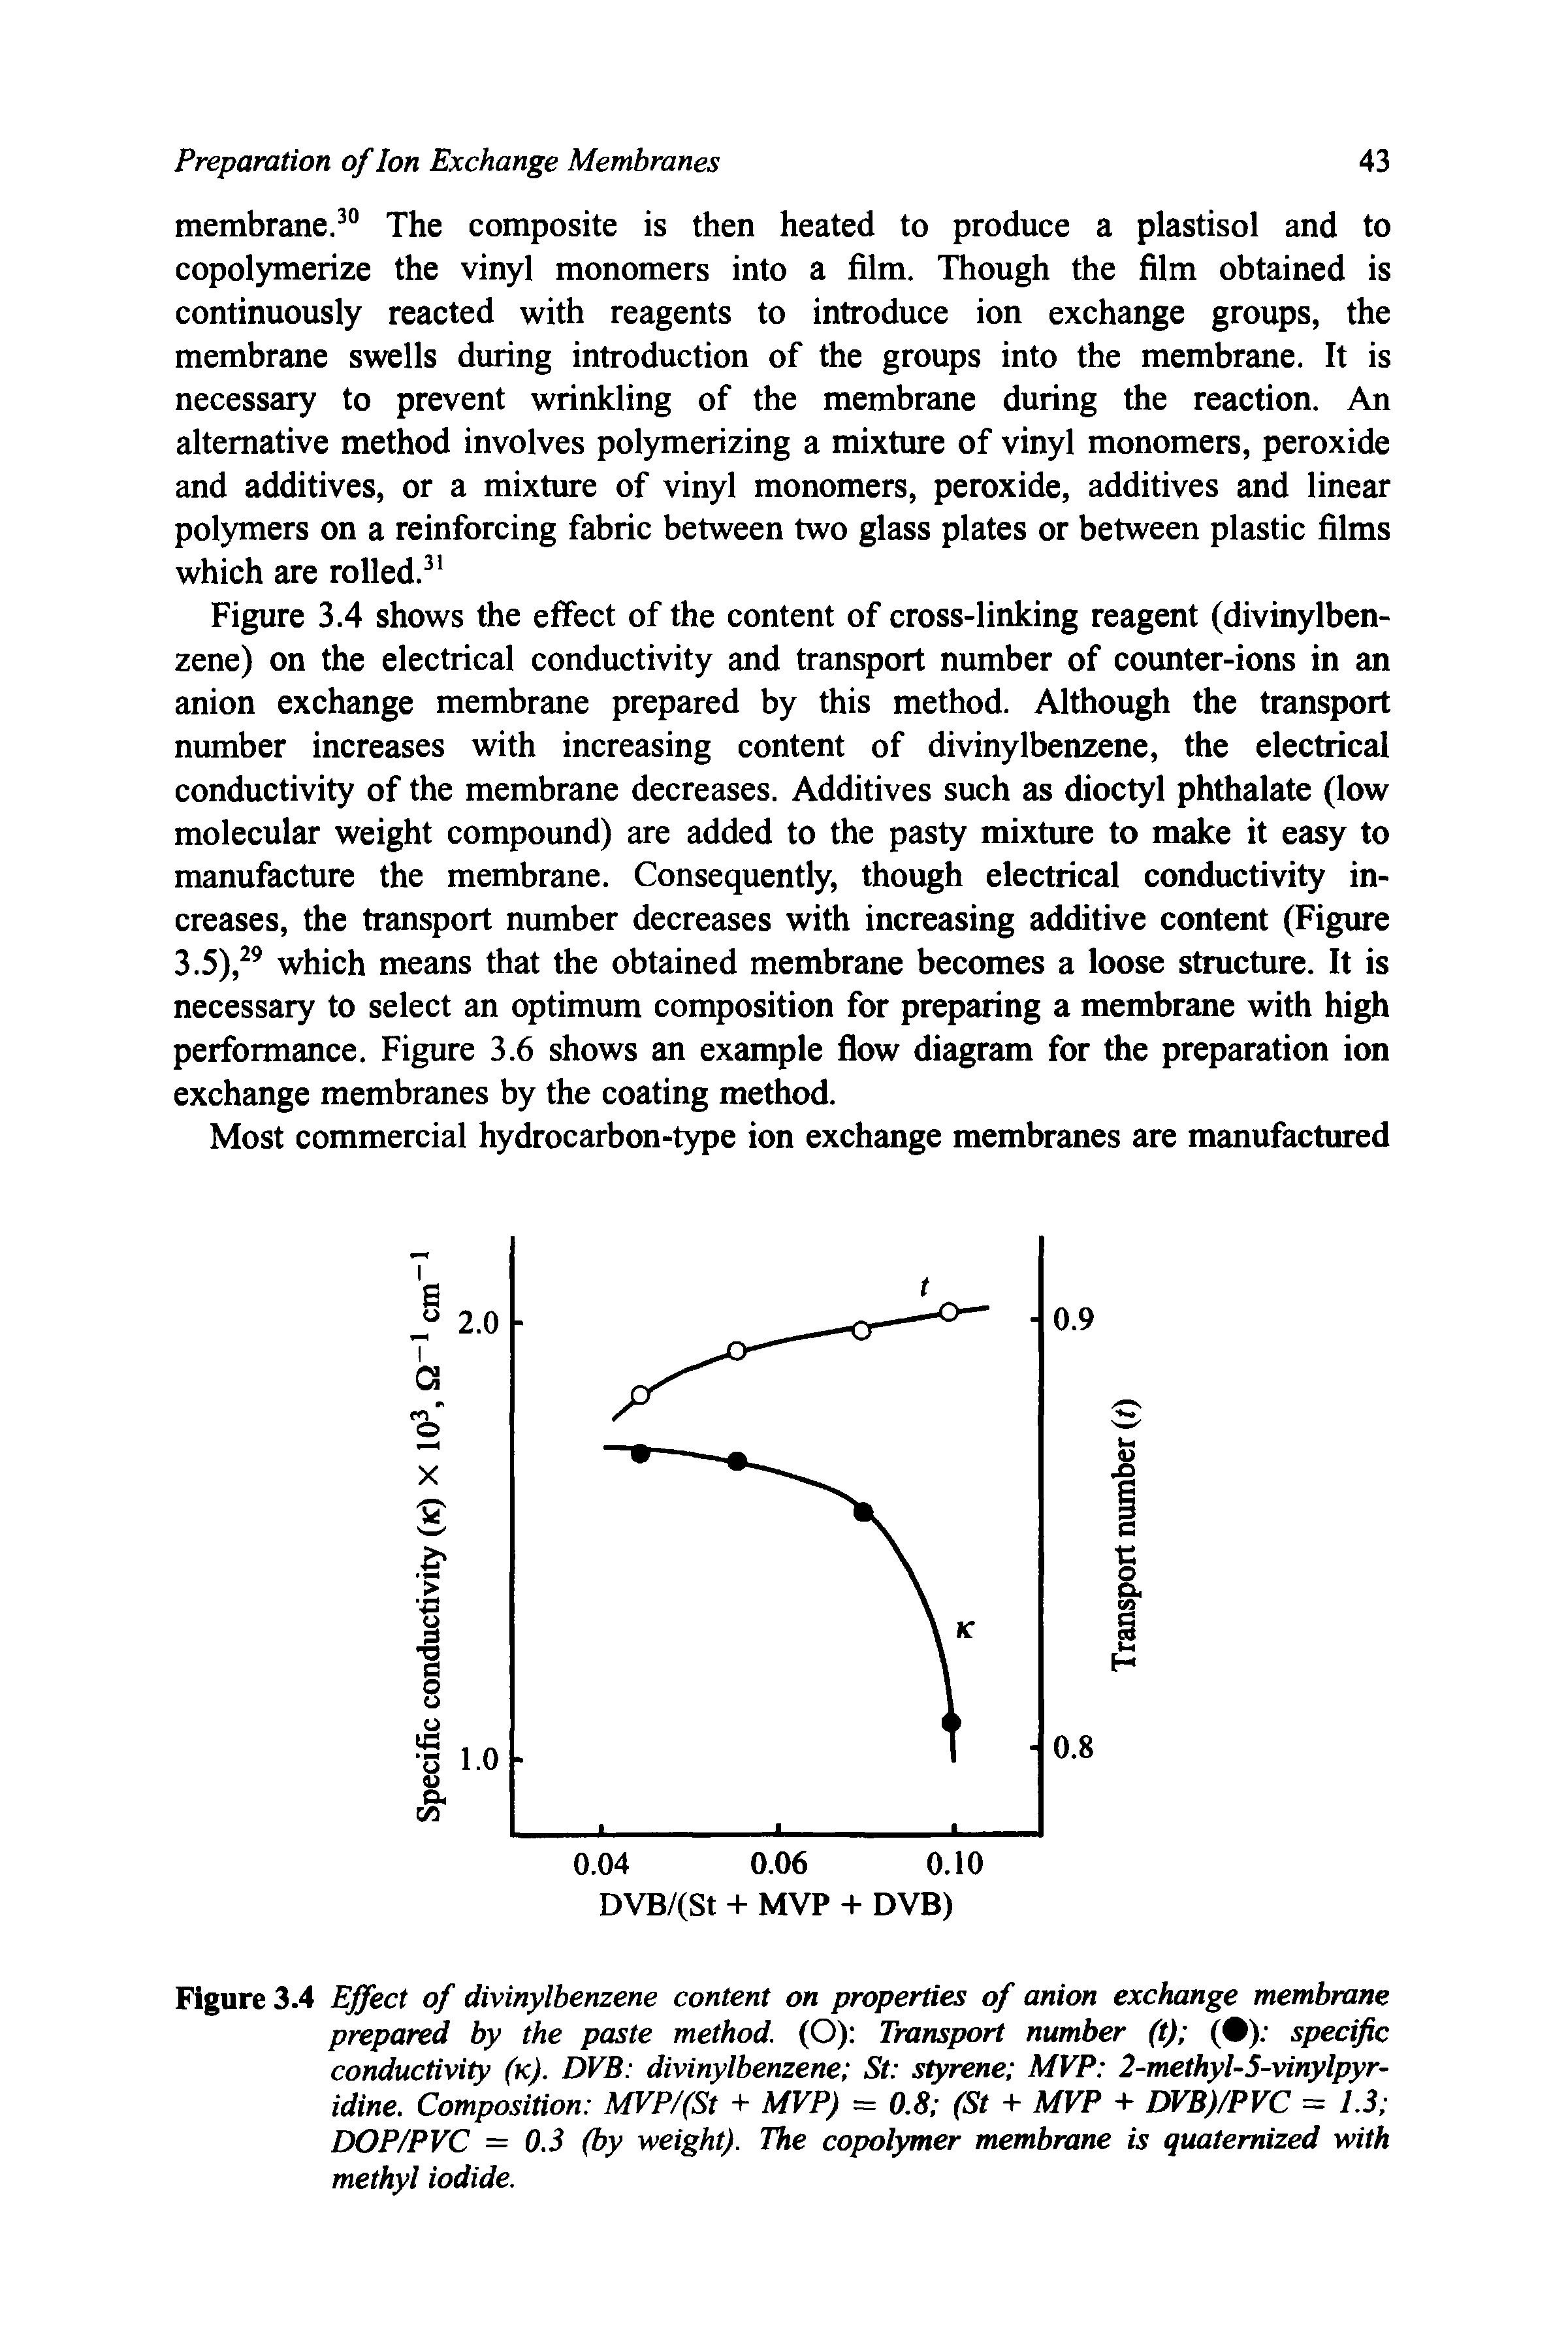 Figure 3.4 Effect of divinylbenzene content on properties of anion exchange membrane prepared by the paste method. (O) Transport number (t) ( ) specific conductivity (k). DVB divinylbenzene St styrene MVP 2-methyl-5-vinylpyr-idine. Composition MVP/(St + MVP) — 0.8 (St + MVP + DVB)/PVC = 1.3 DOP/PVC = 0.3 (by weight). The copolymer membrane is quatemized with methyl iodide.